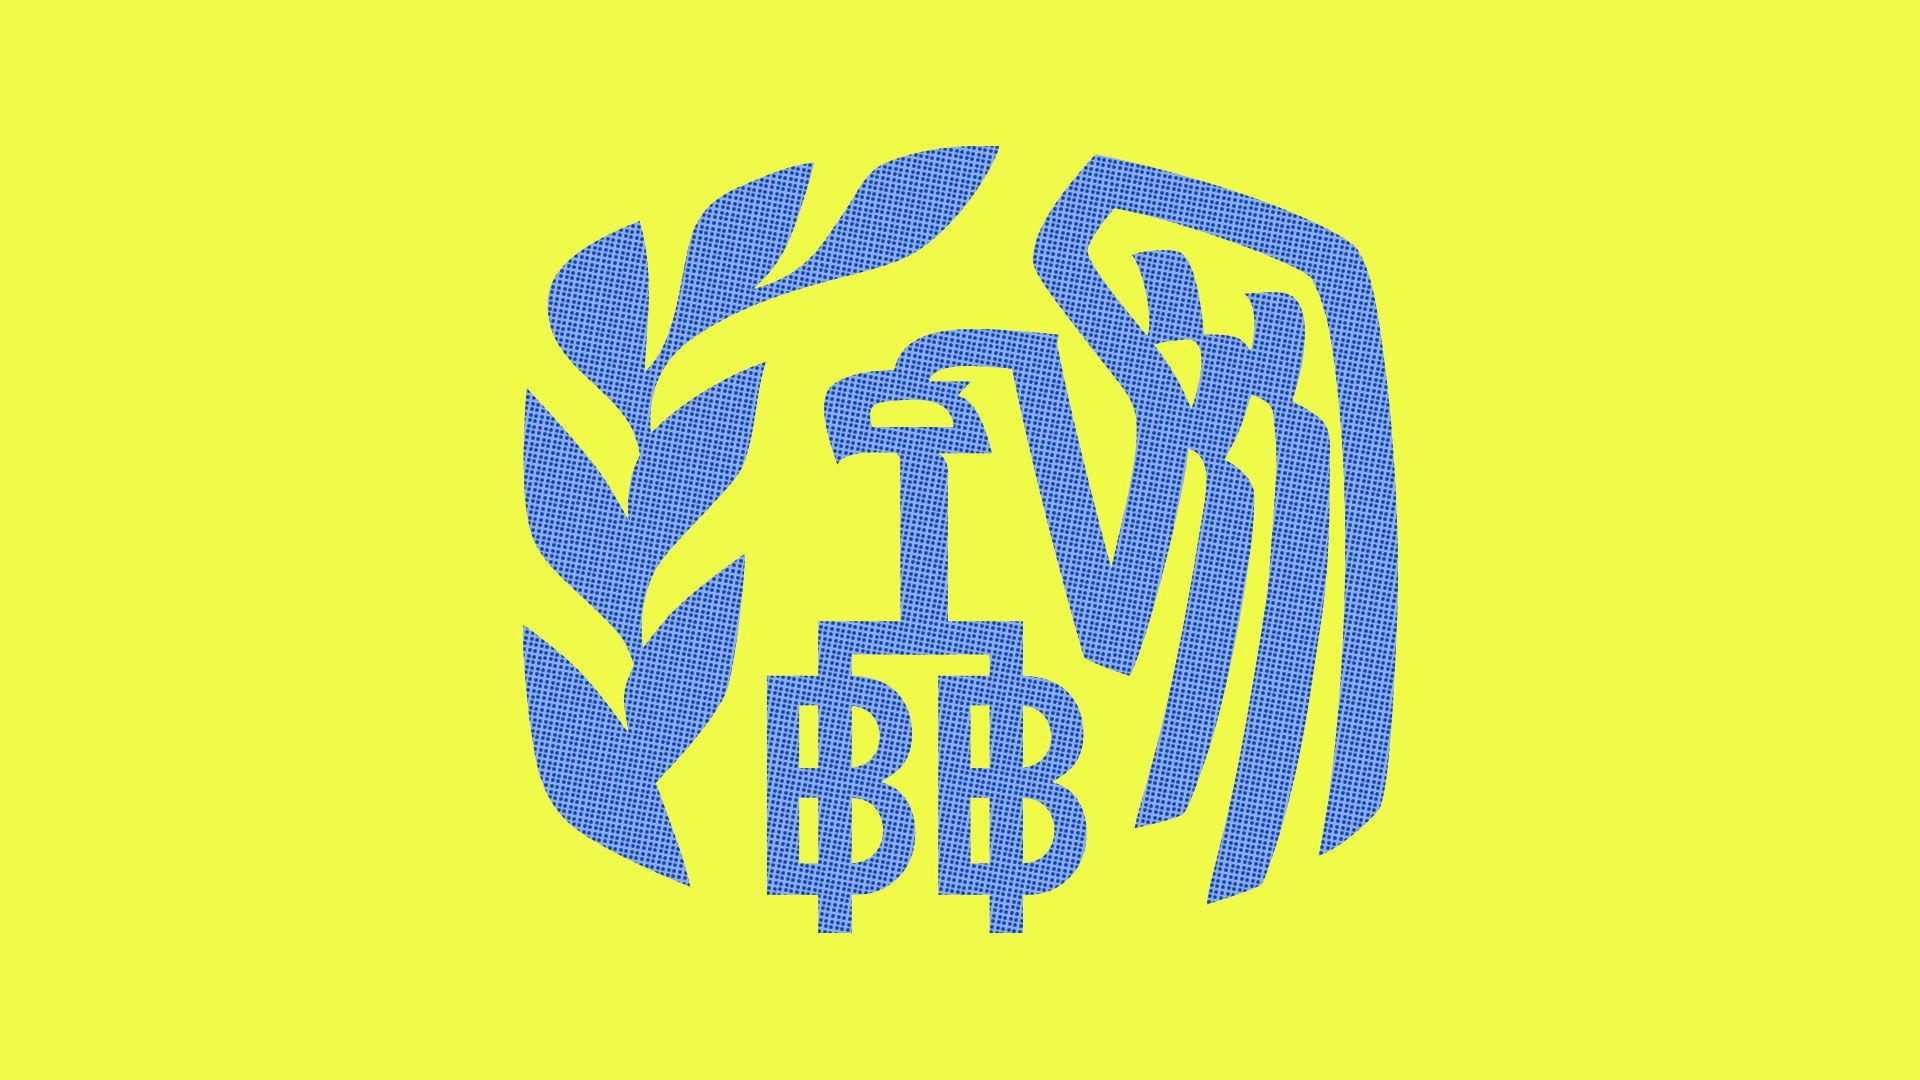 An illustration of the IRS and bitcoin logos